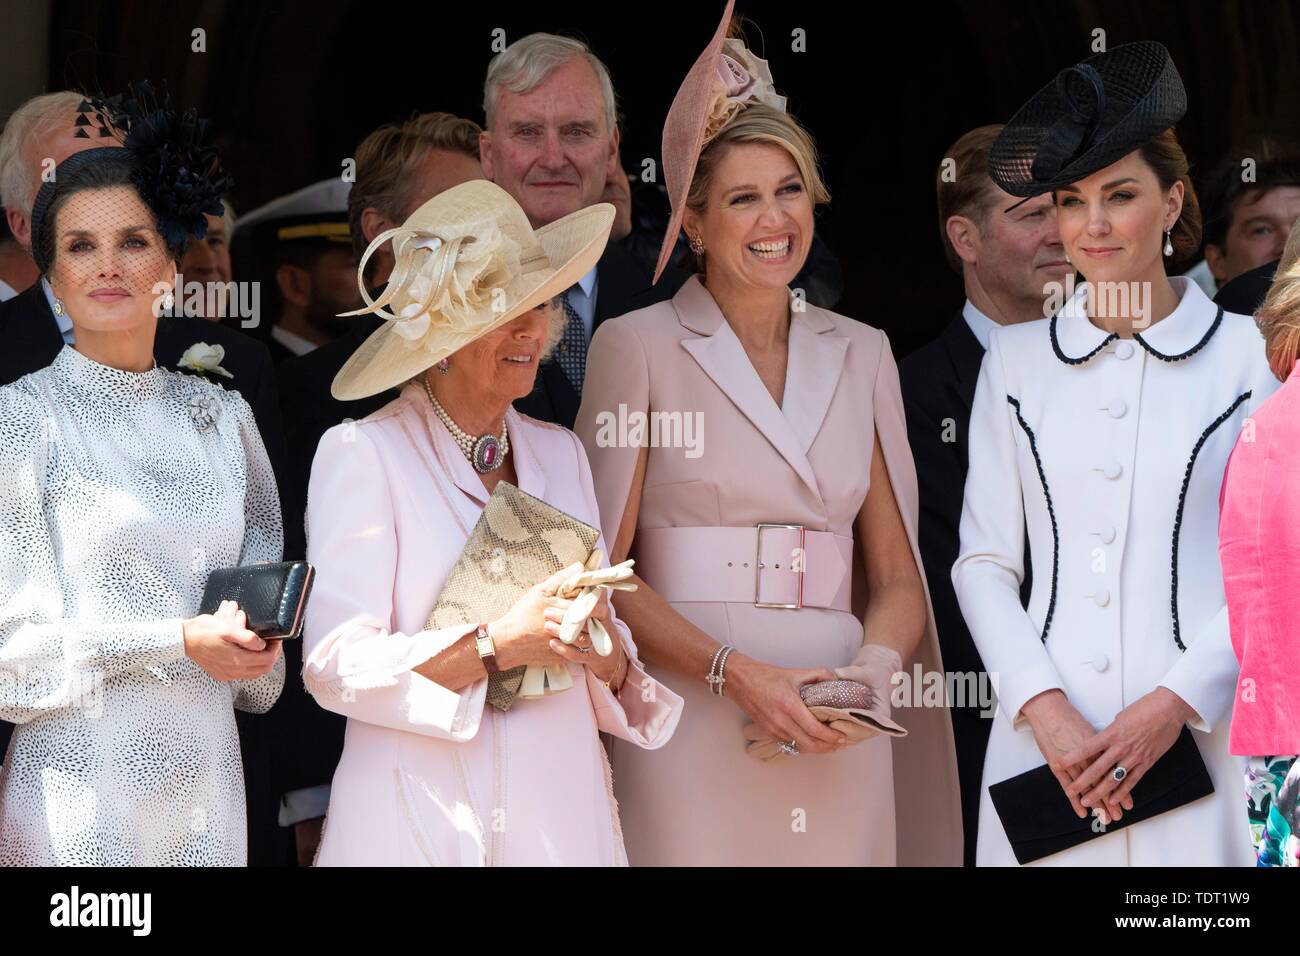 queen-letizia-camilla-duchess-of-cornwall-queen-maxima-and-princess-kate-leave-the-st-georges-chapel-at-windsor-castle-in-windsor-on-june-17-2019-king-willem-alexander-and-king-felipe-are-installed-by-her-majesty-queen-elizabeth-ii-in-the-most-noble-order-of-the-garter-during-an-annual-ceremony-they-are-installed-as-supernumerary-knight-of-the-garter-photo-albert-nieboer-netherlands-outpoint-de-vue-out-TDT1W9.jpg